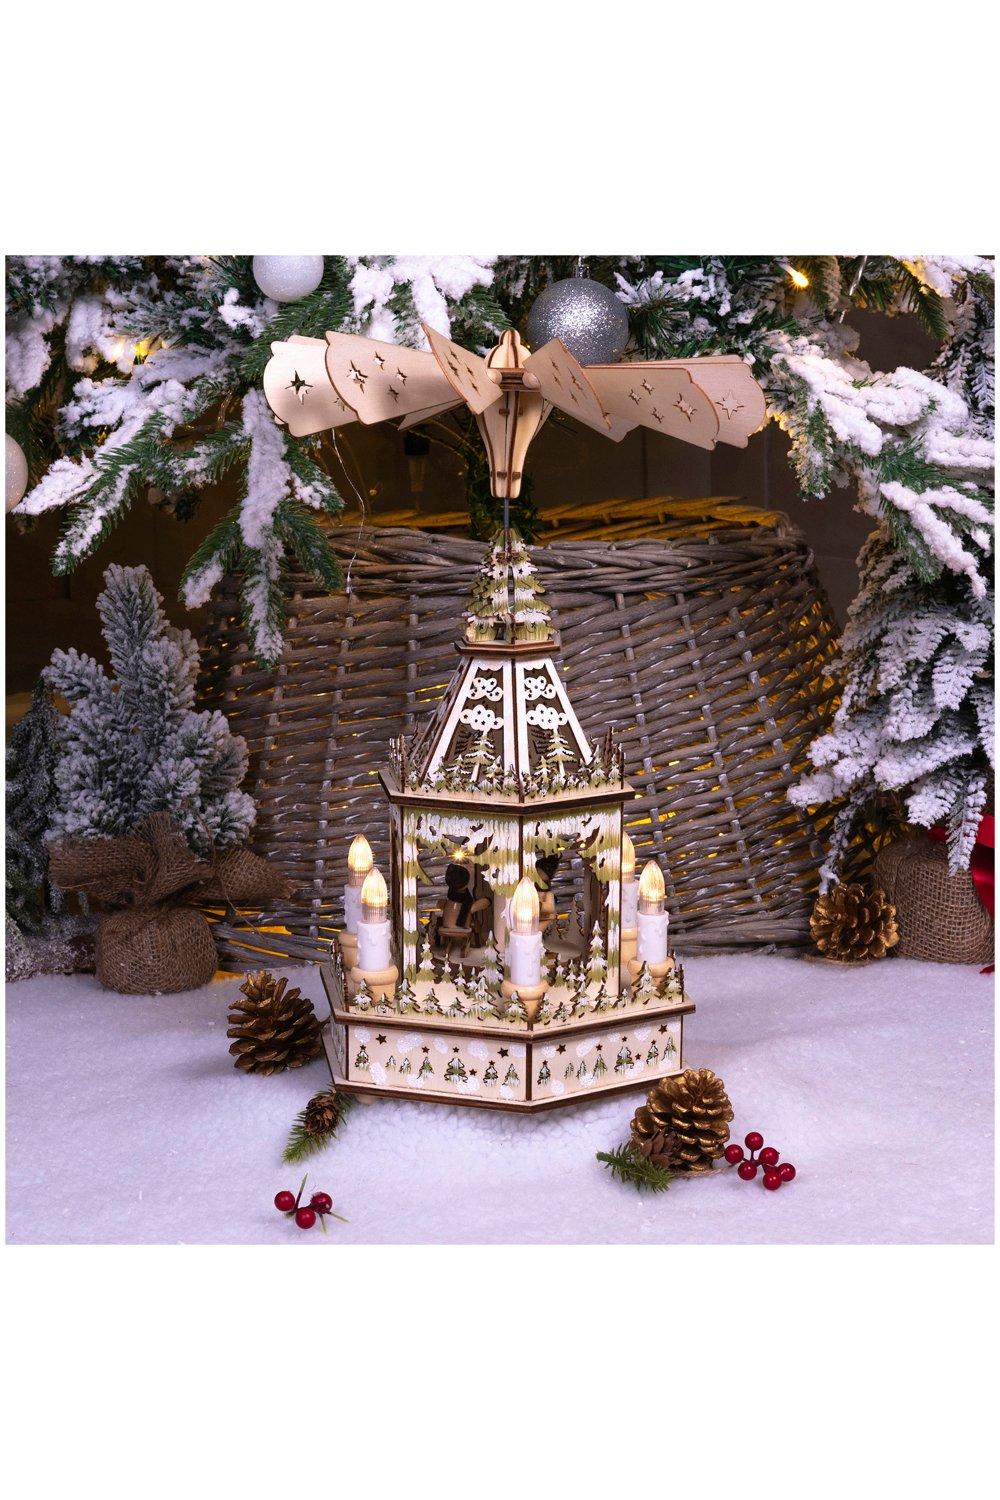 Battery Powered Wooden Christmas Pyramid with 6 LED Lights